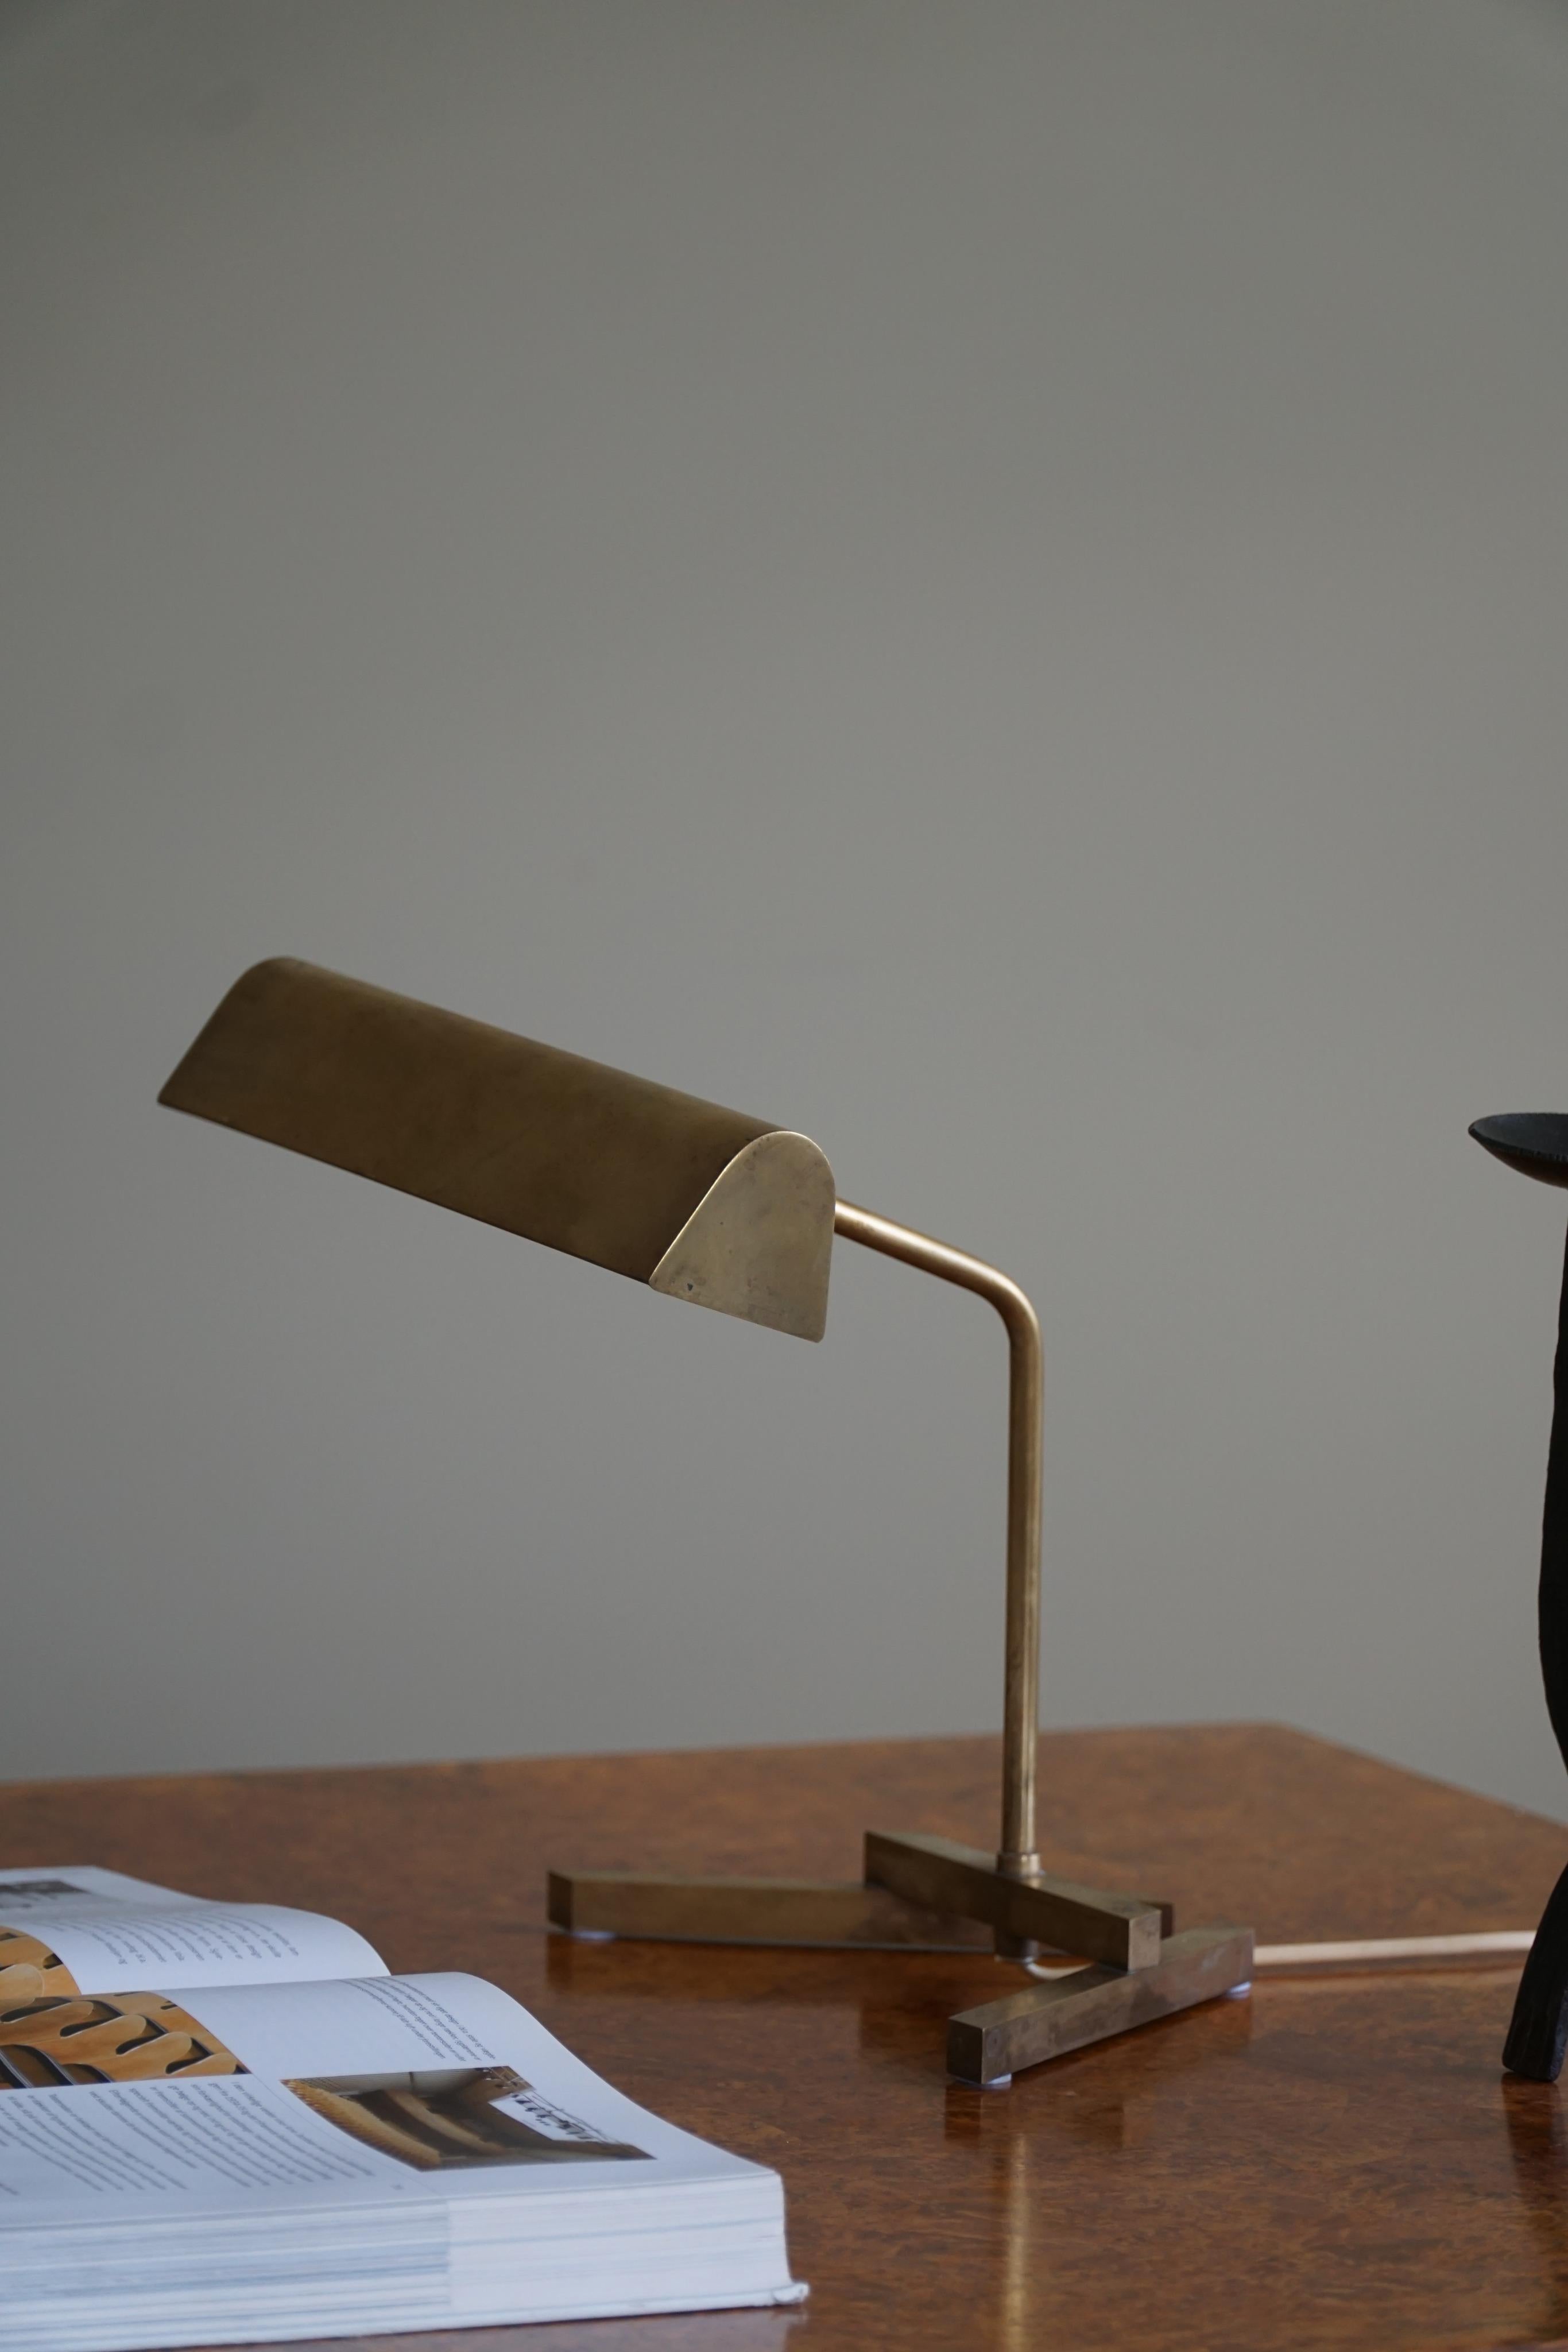 Danish Mid Century Modern, Geometric Table Lamp in Brass from the 1950s For Sale 7